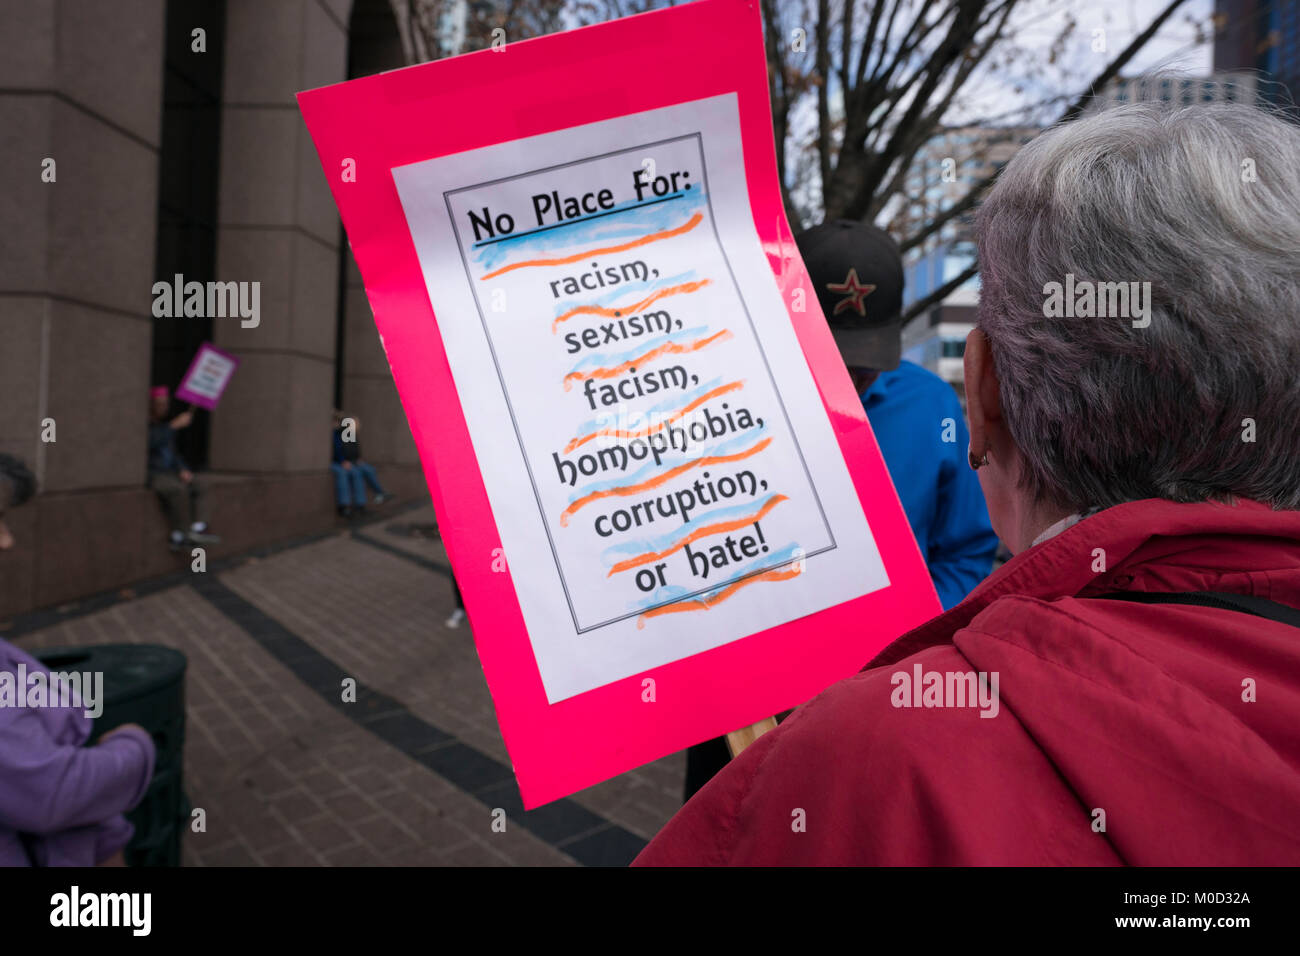 A woman holds a sign protesting racism, sexism, fascism, homophobia, corruption and hate as Texas women march up Congress Avenue in Austin, Texas, during a rally on the first anniversary of the Women's March on Washington and a year after President Donald Trump's inauguration. Stock Photo